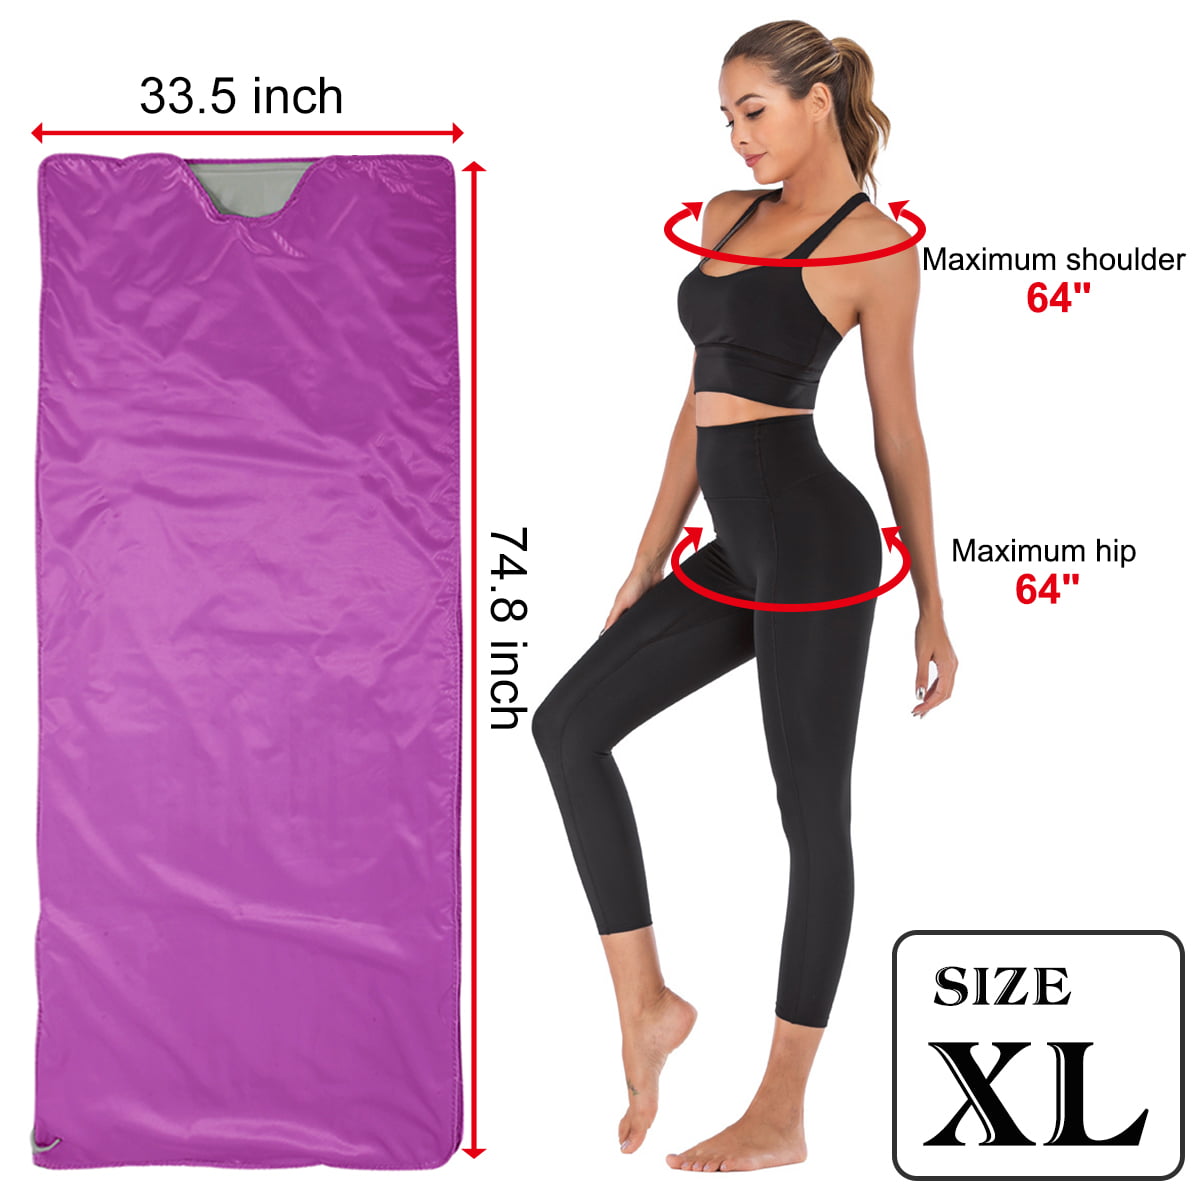 FIR XYOUNG Far-Infrared Blanket Body Shaper Weight Loss Professional Detox Therapy Machine with Timer to Reduce Weight Thin Body Home Beauty Digital Heat Sauna Slimming 